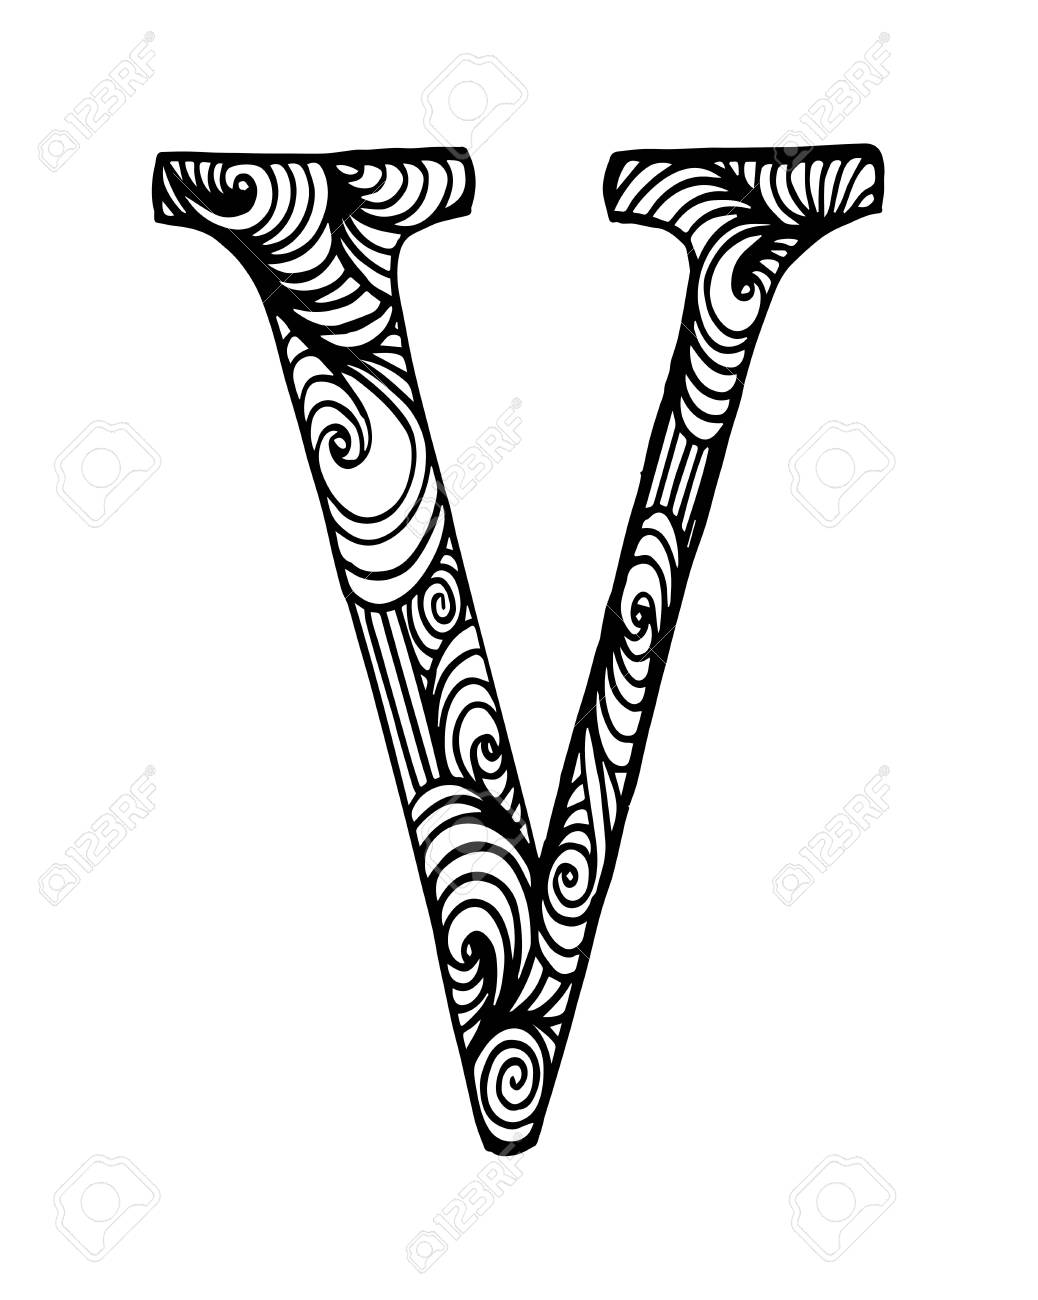 Letter v in doodle style hand drawn sketch font vector illustration for coloring page makhendas or decoration royalty free svg cliparts vectors and stock illustration image